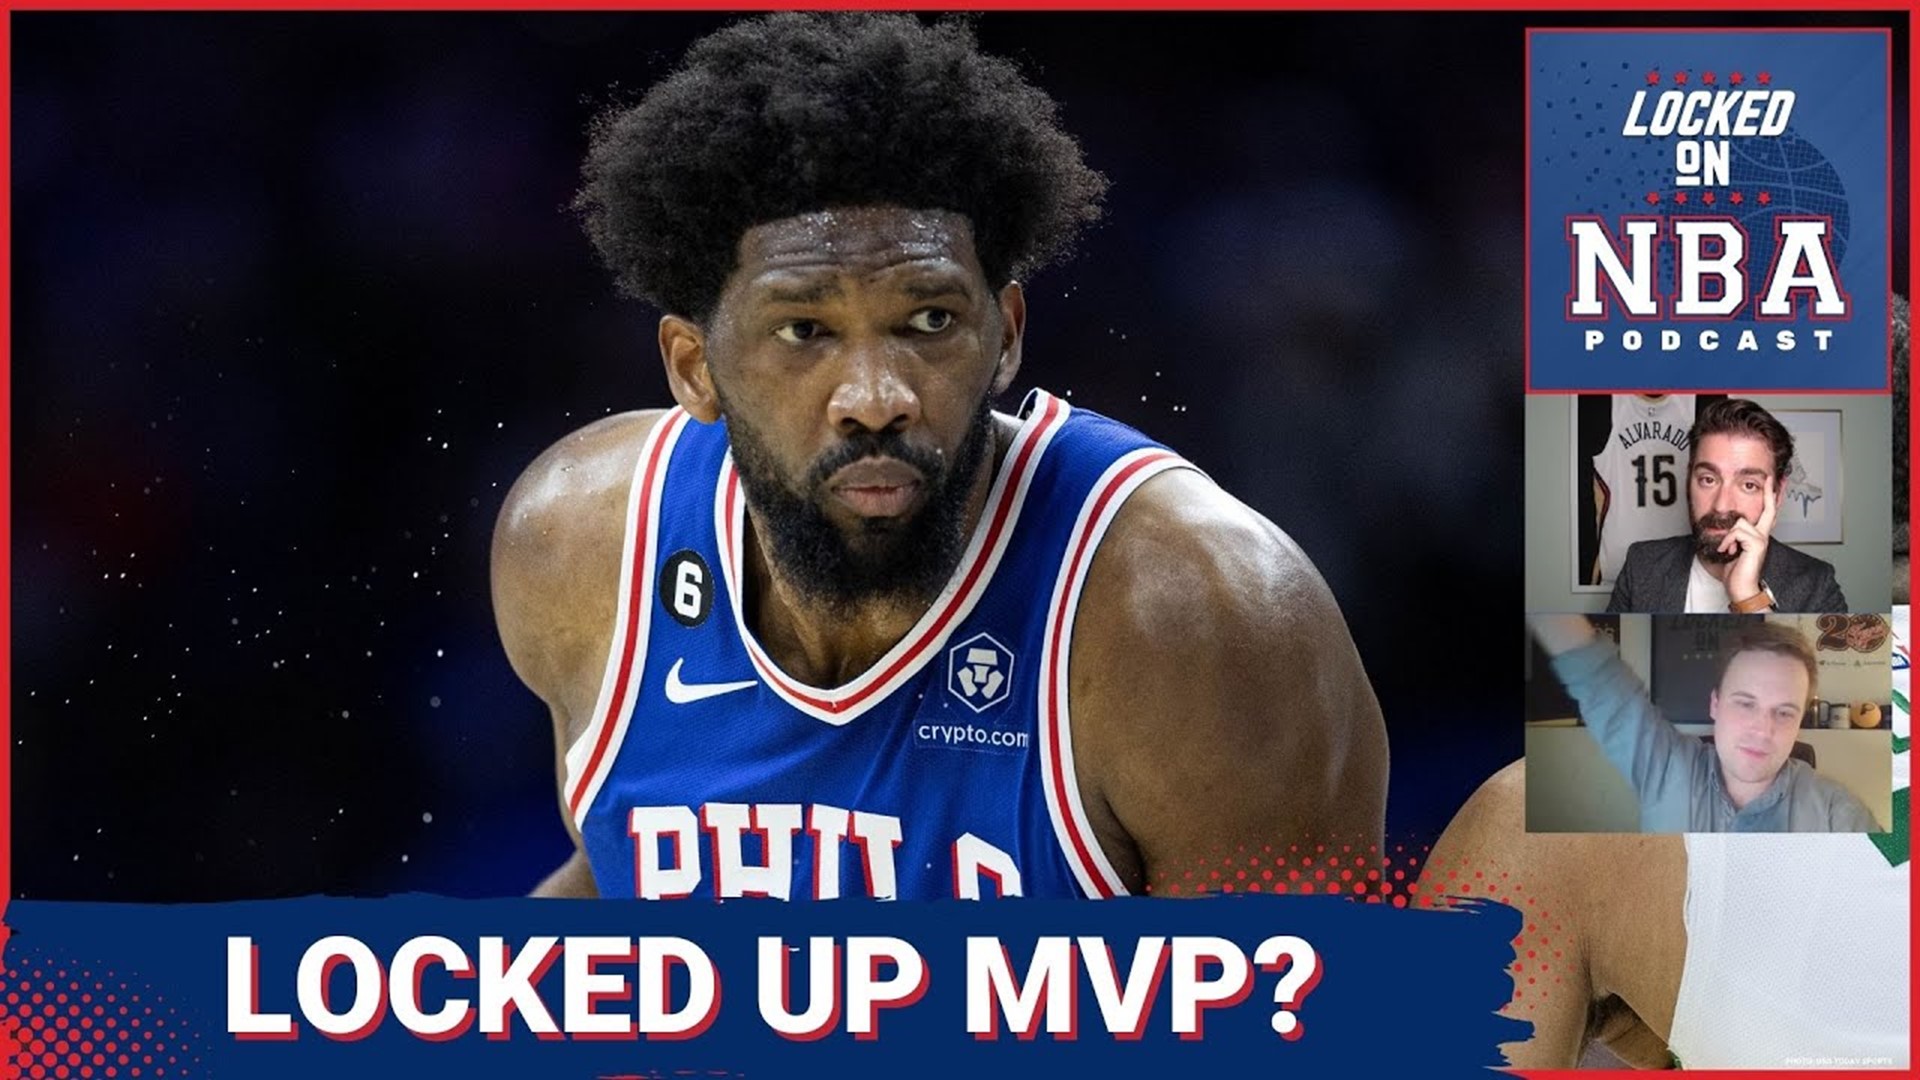 Did Joel Embiid lock up the NBA MVP award after scoring 52 points?